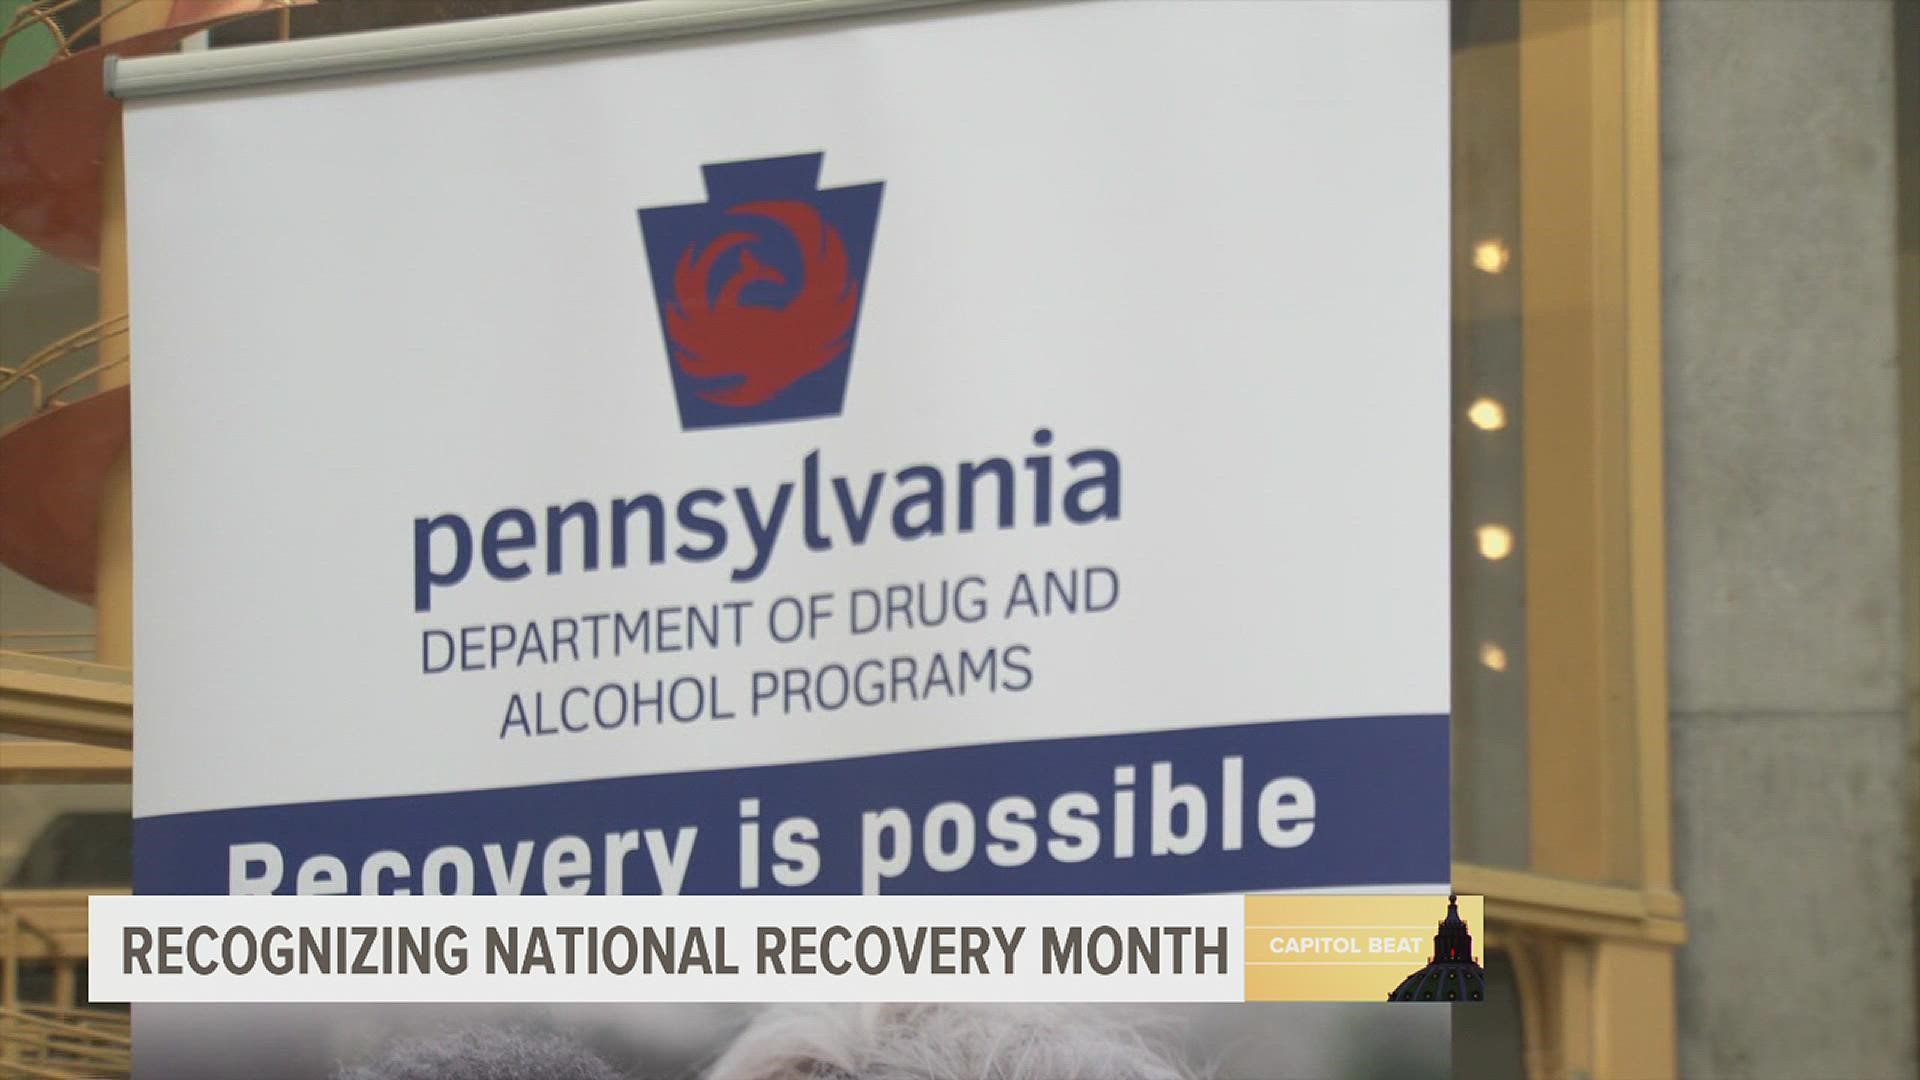 Jennifer Smith, Secretary of the Pa. Department of Drug and Alcohol Programs spoke to Matt Maisel about the spike in substance-related deaths during the pandemic.